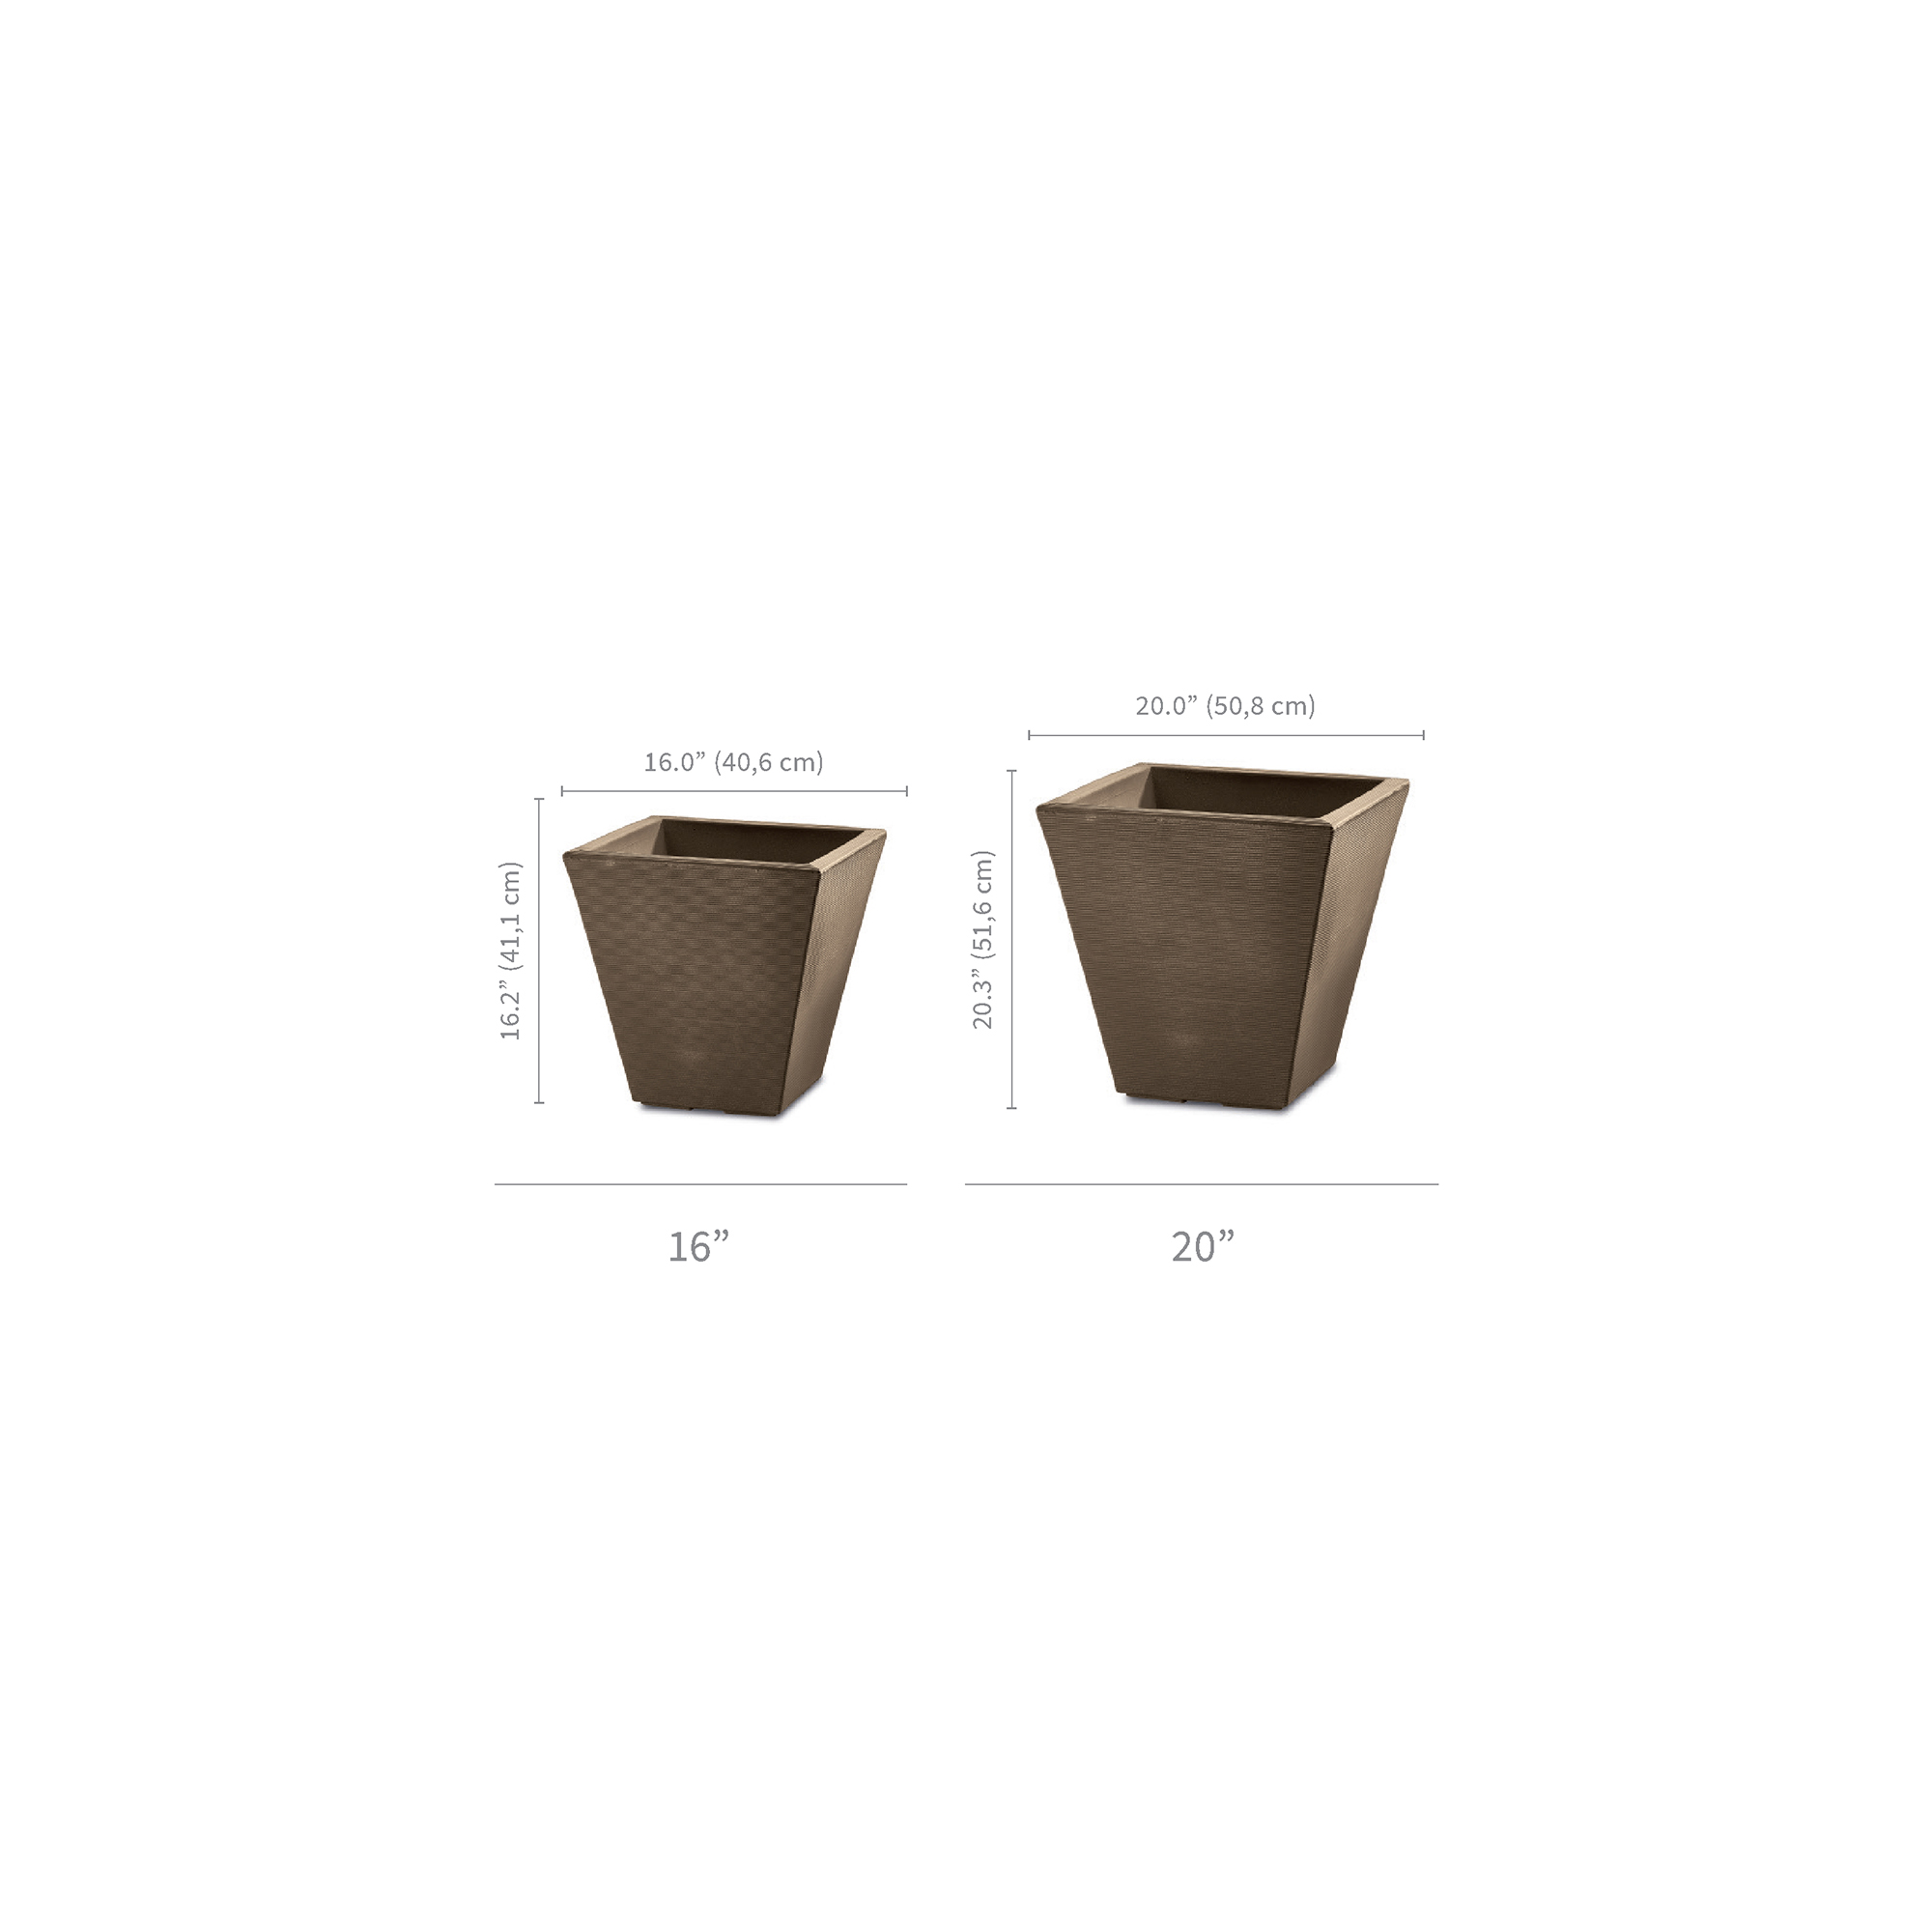 Gramercy Square planters specifications